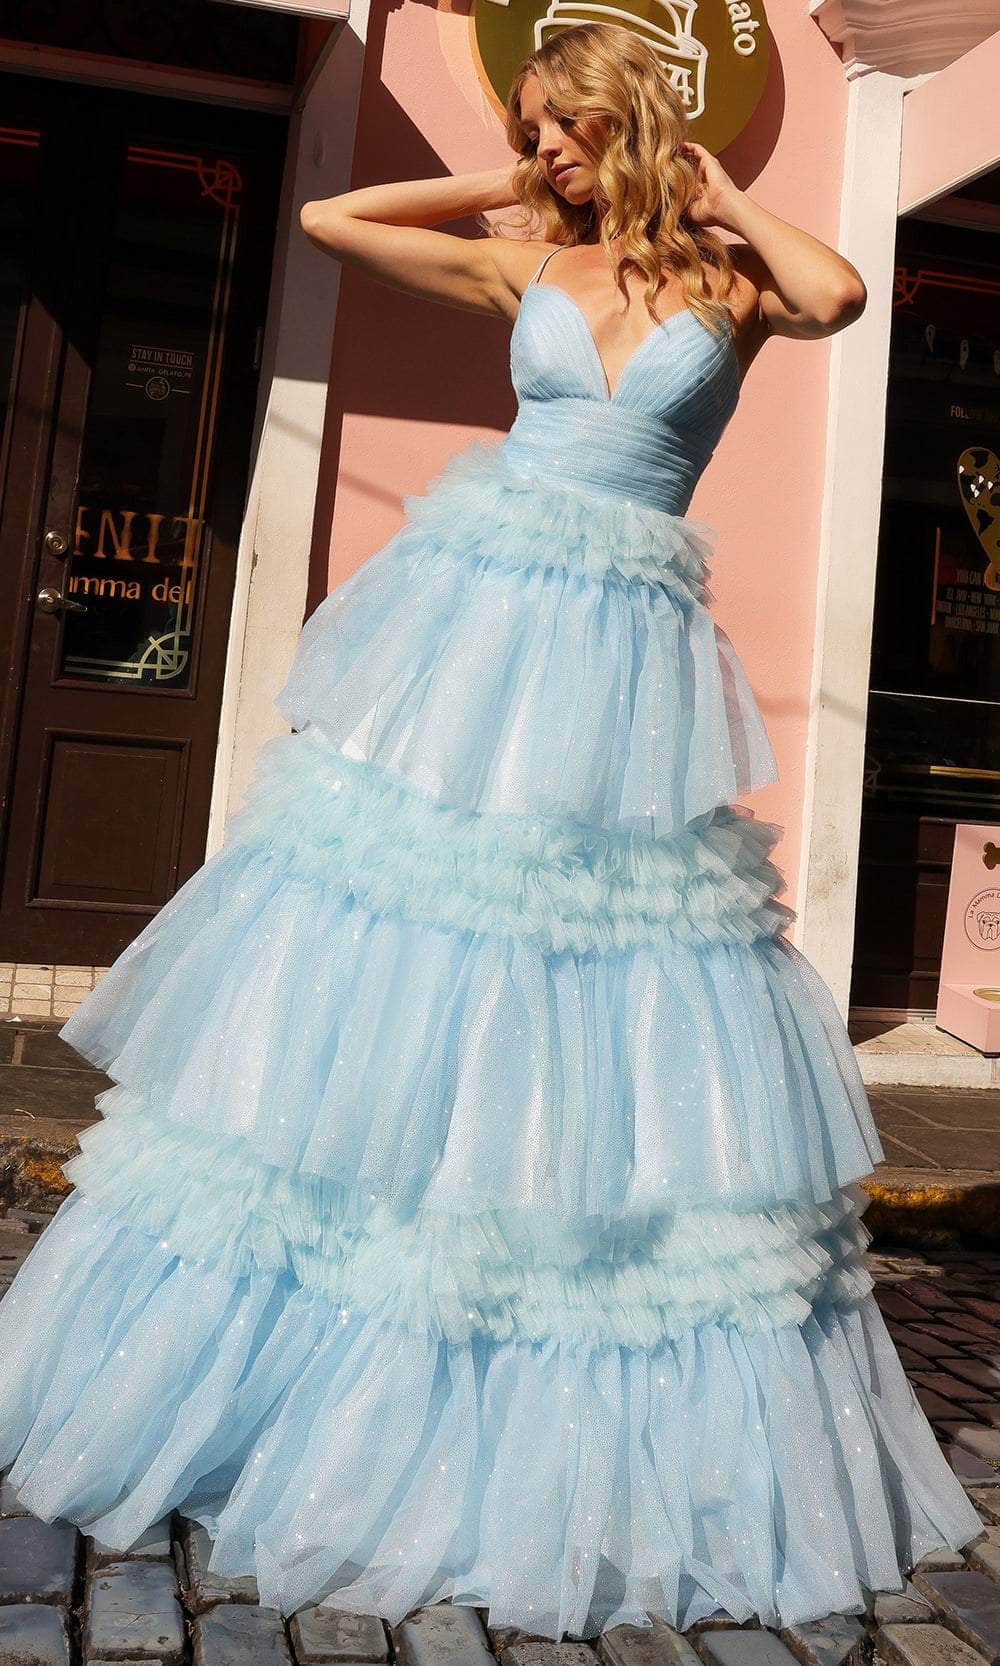 Nox Anabel R1316 - Deep V-Neck Tiered Prom Dress Special Occasion Dress 0 / Light Blue